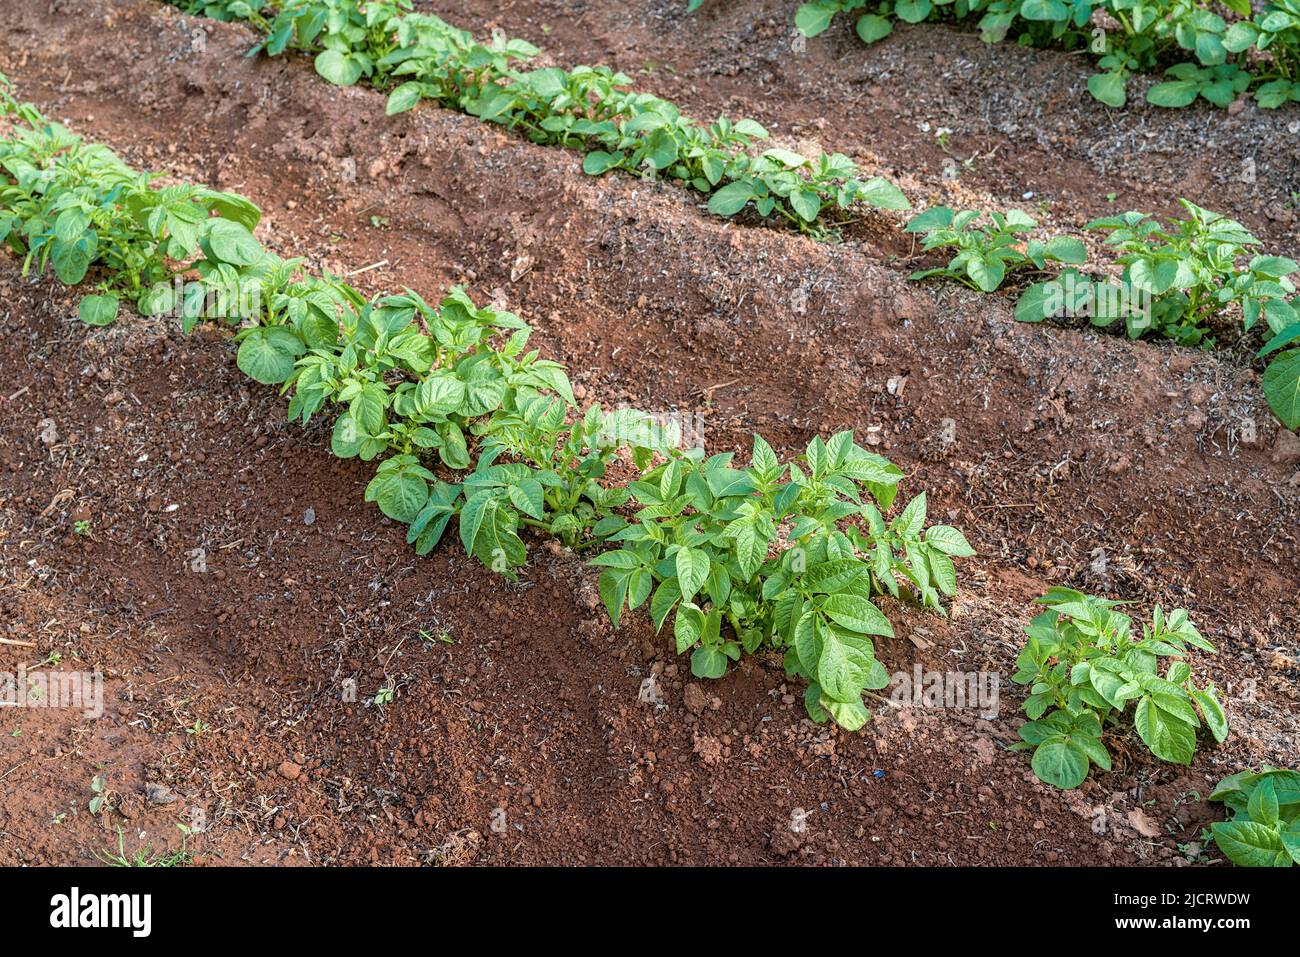 Rows of hilled up potato plants in the home garden. Stock Photo